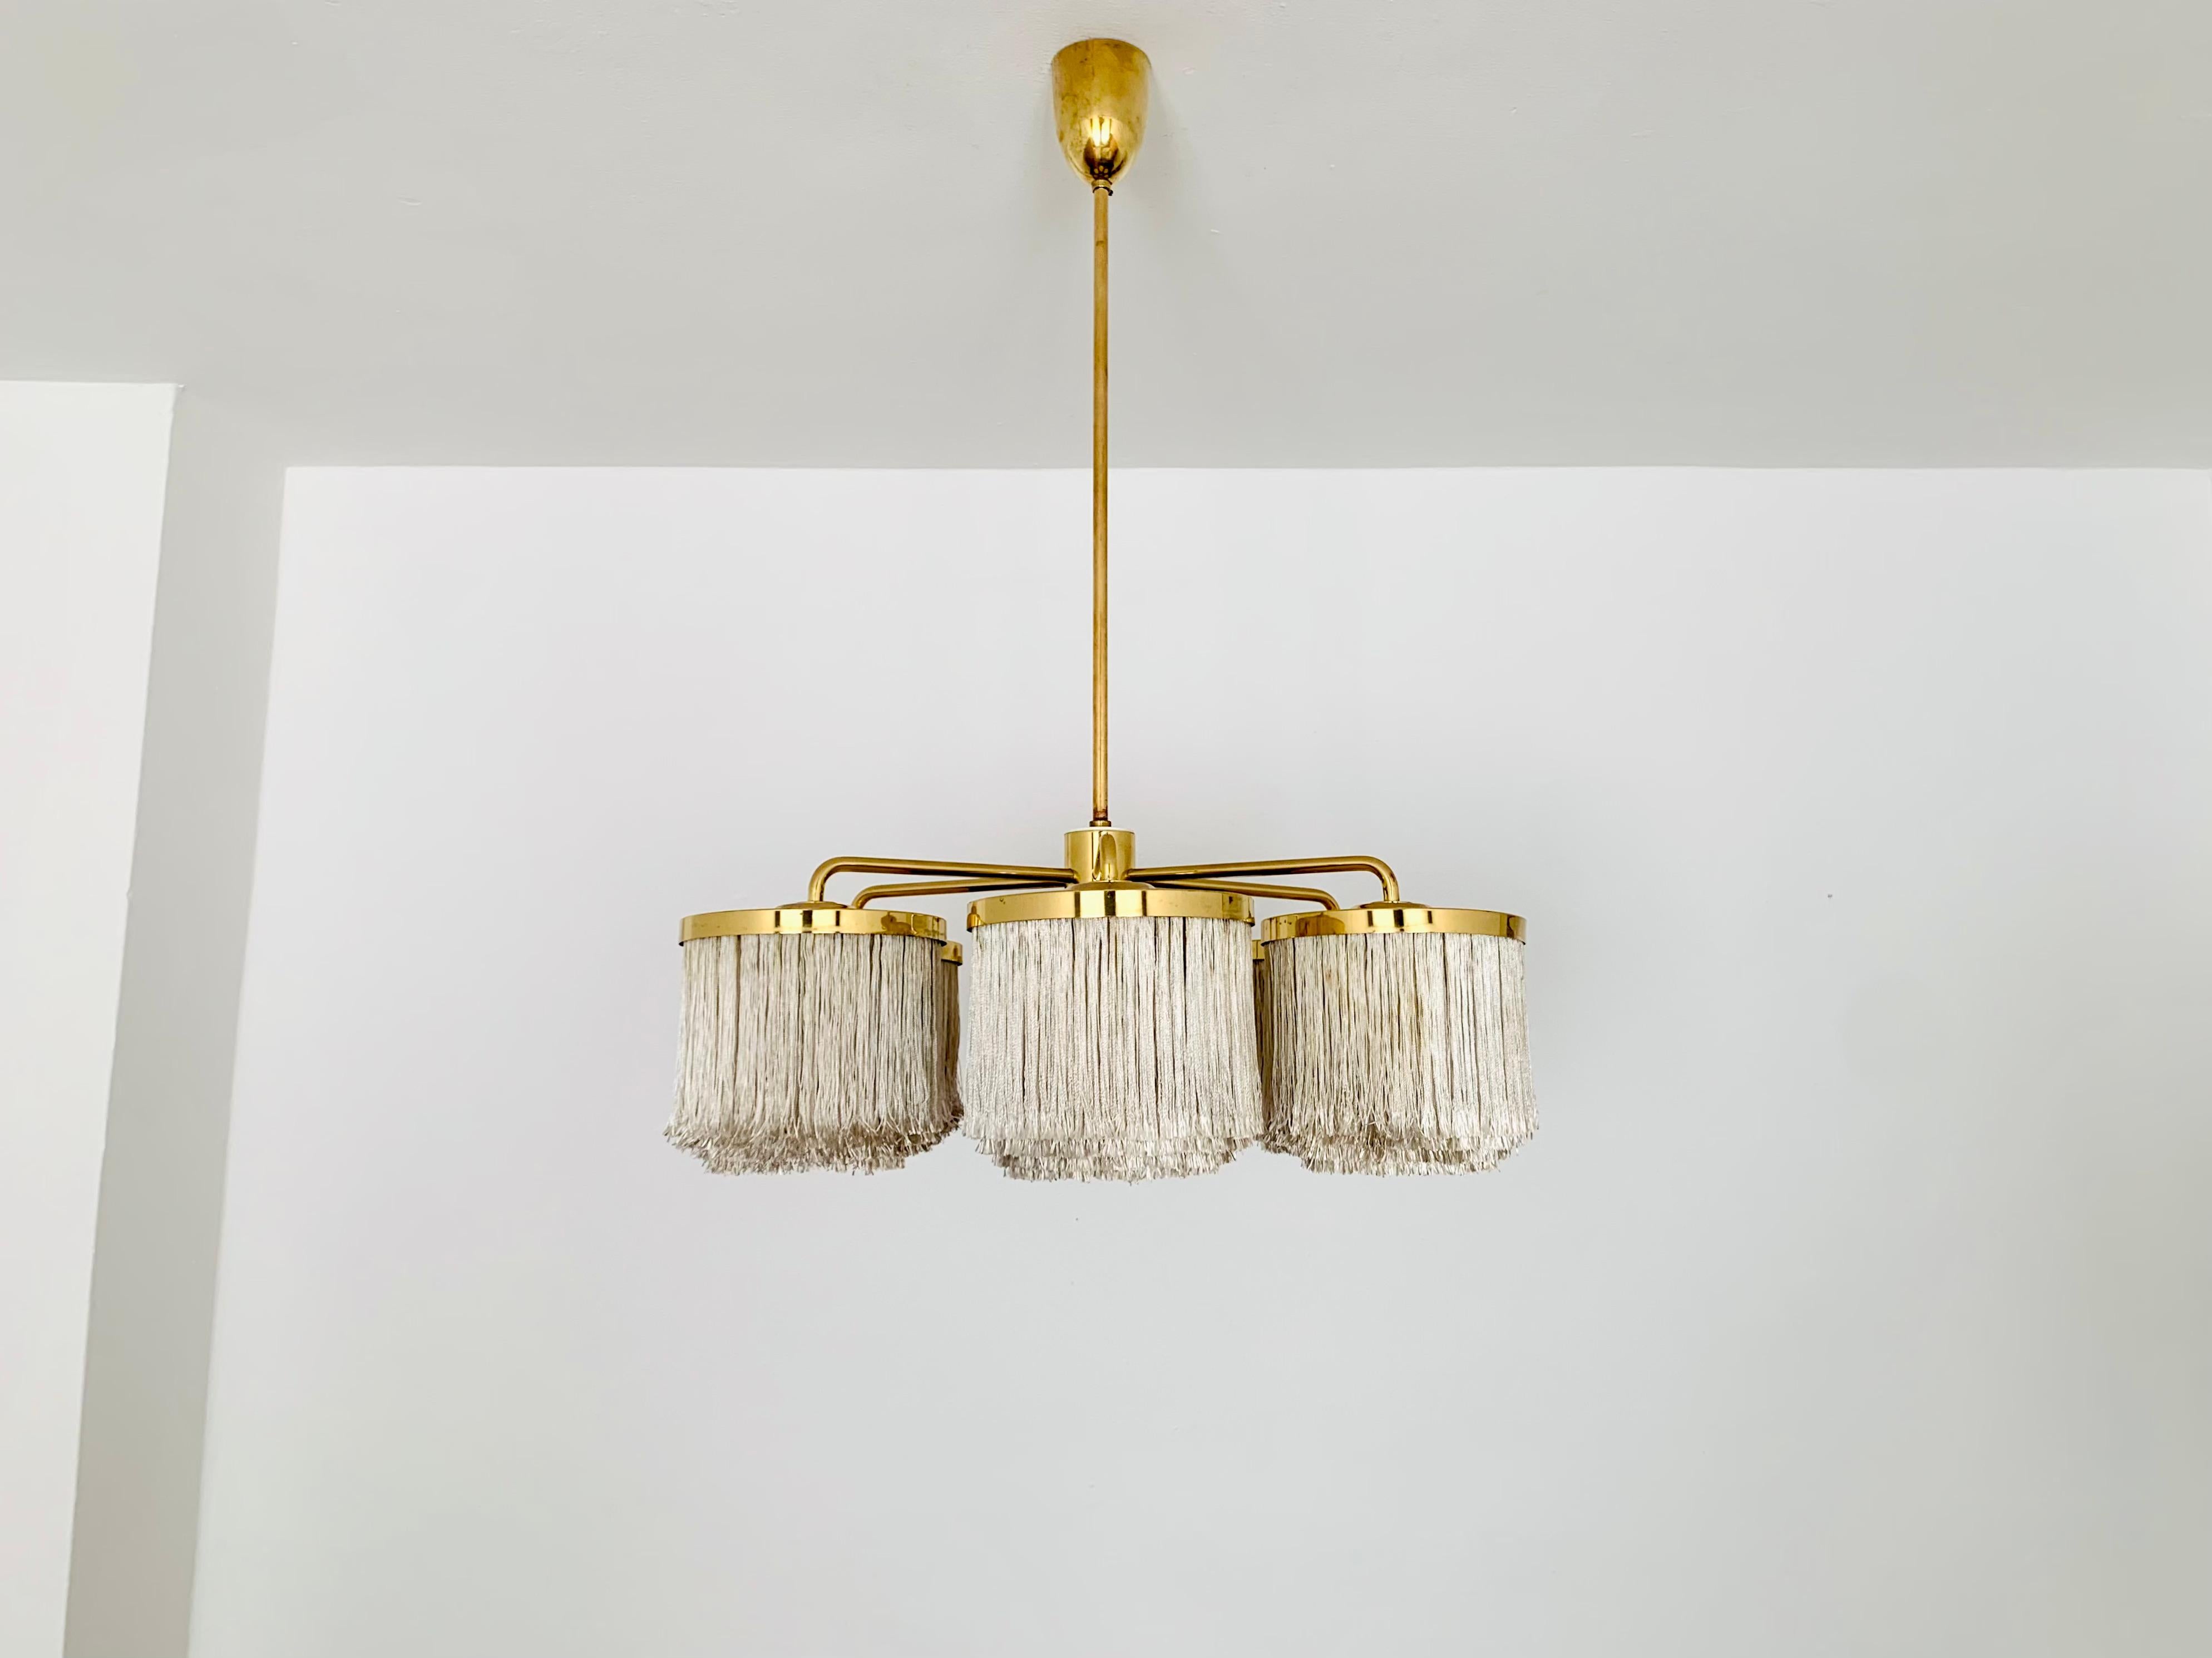 Stunning chandelier from the 1960s.
Very luxurious design and high quality workmanship.
The lamp is a real asset and an absolute favorite for every home.
A very cozy light is created.

Design: Hans Agne Jakobsson

Condition:

Very good